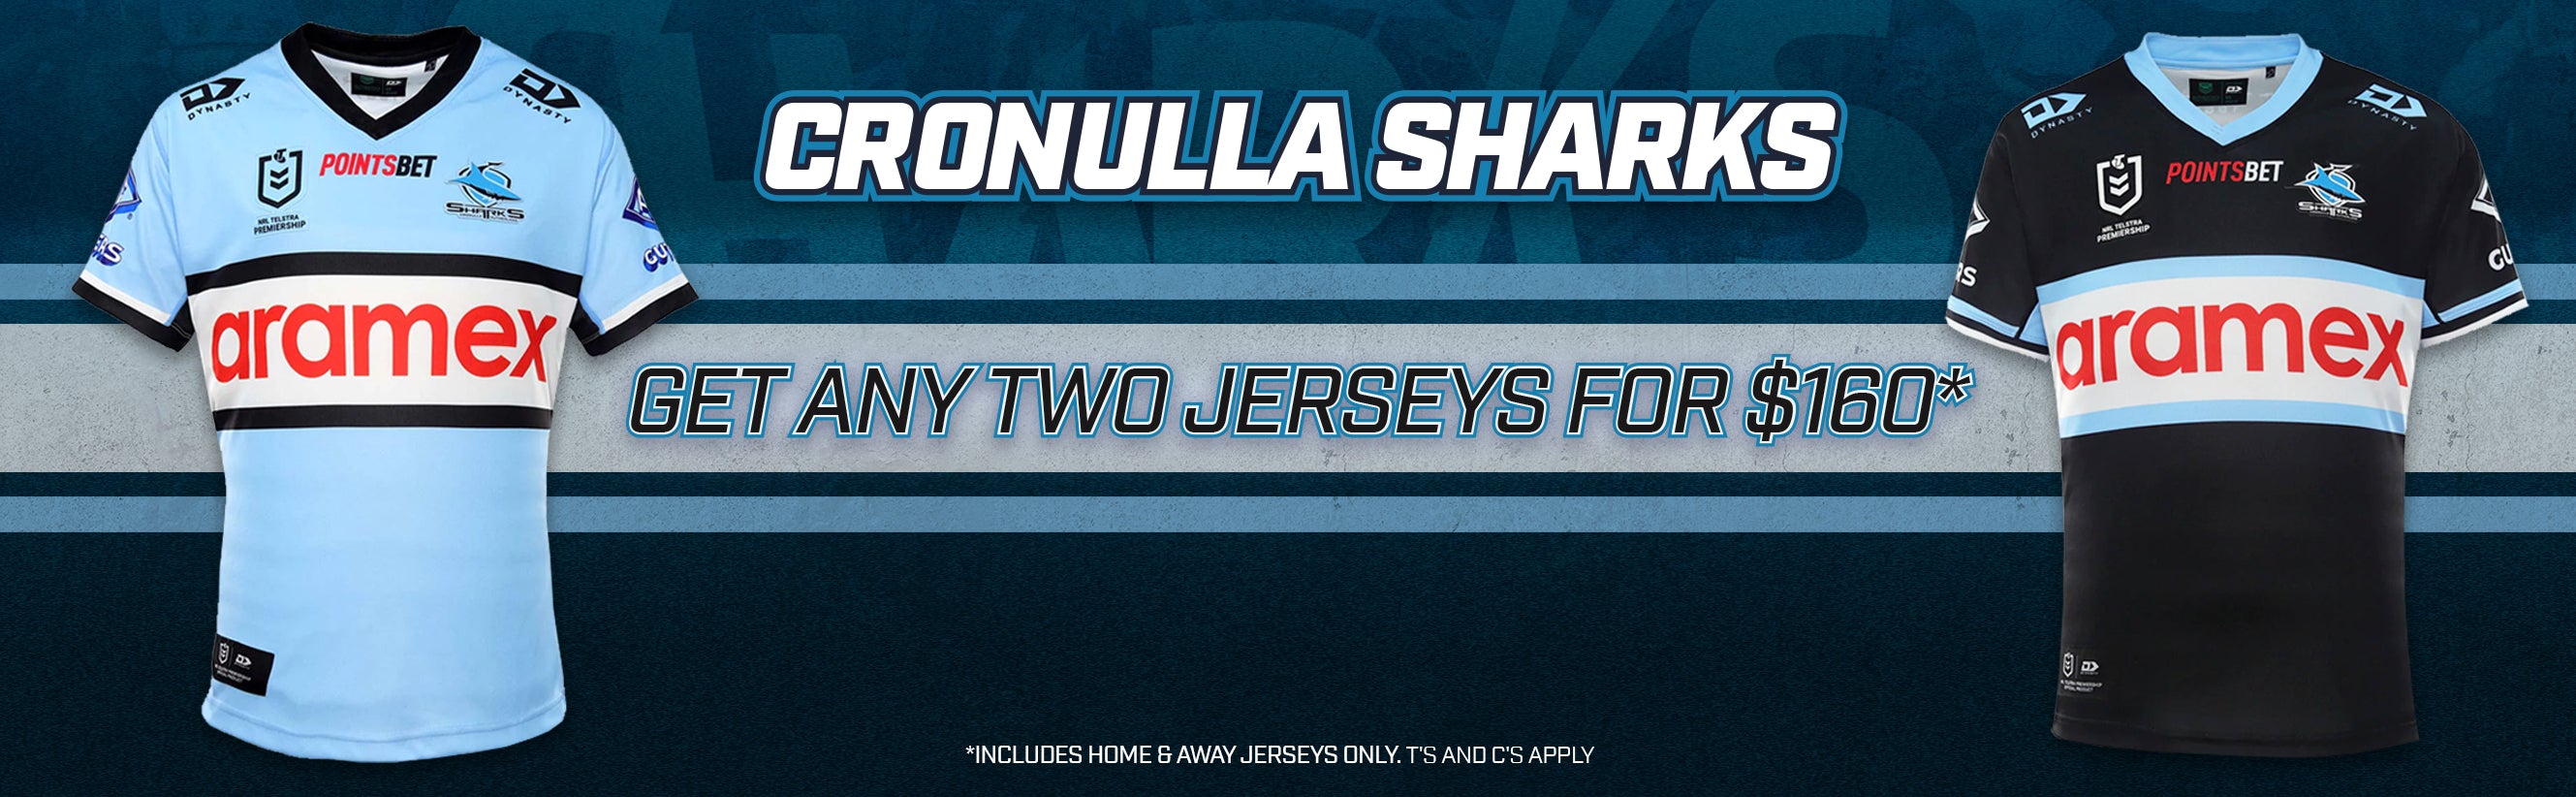 DS_Sharks_Bundle_Collection_Banner_021122_JH_2f31f92a-ce97-4912-b271-70447c196c82.jpg